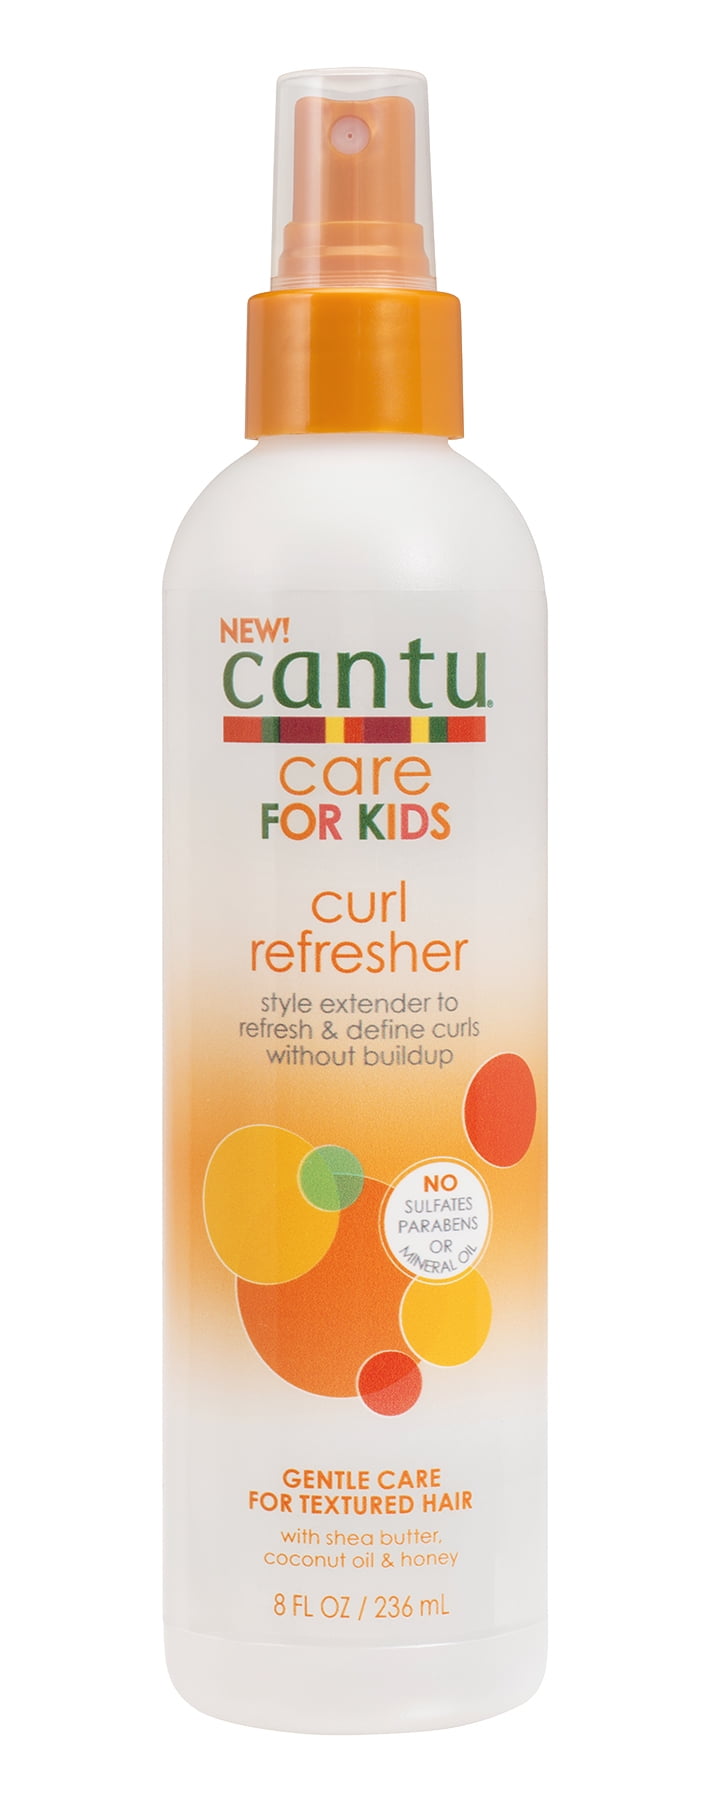 Cantu Care for Kids Curl Refresher with Shea Butter & Coconut Oil, 8 oz.